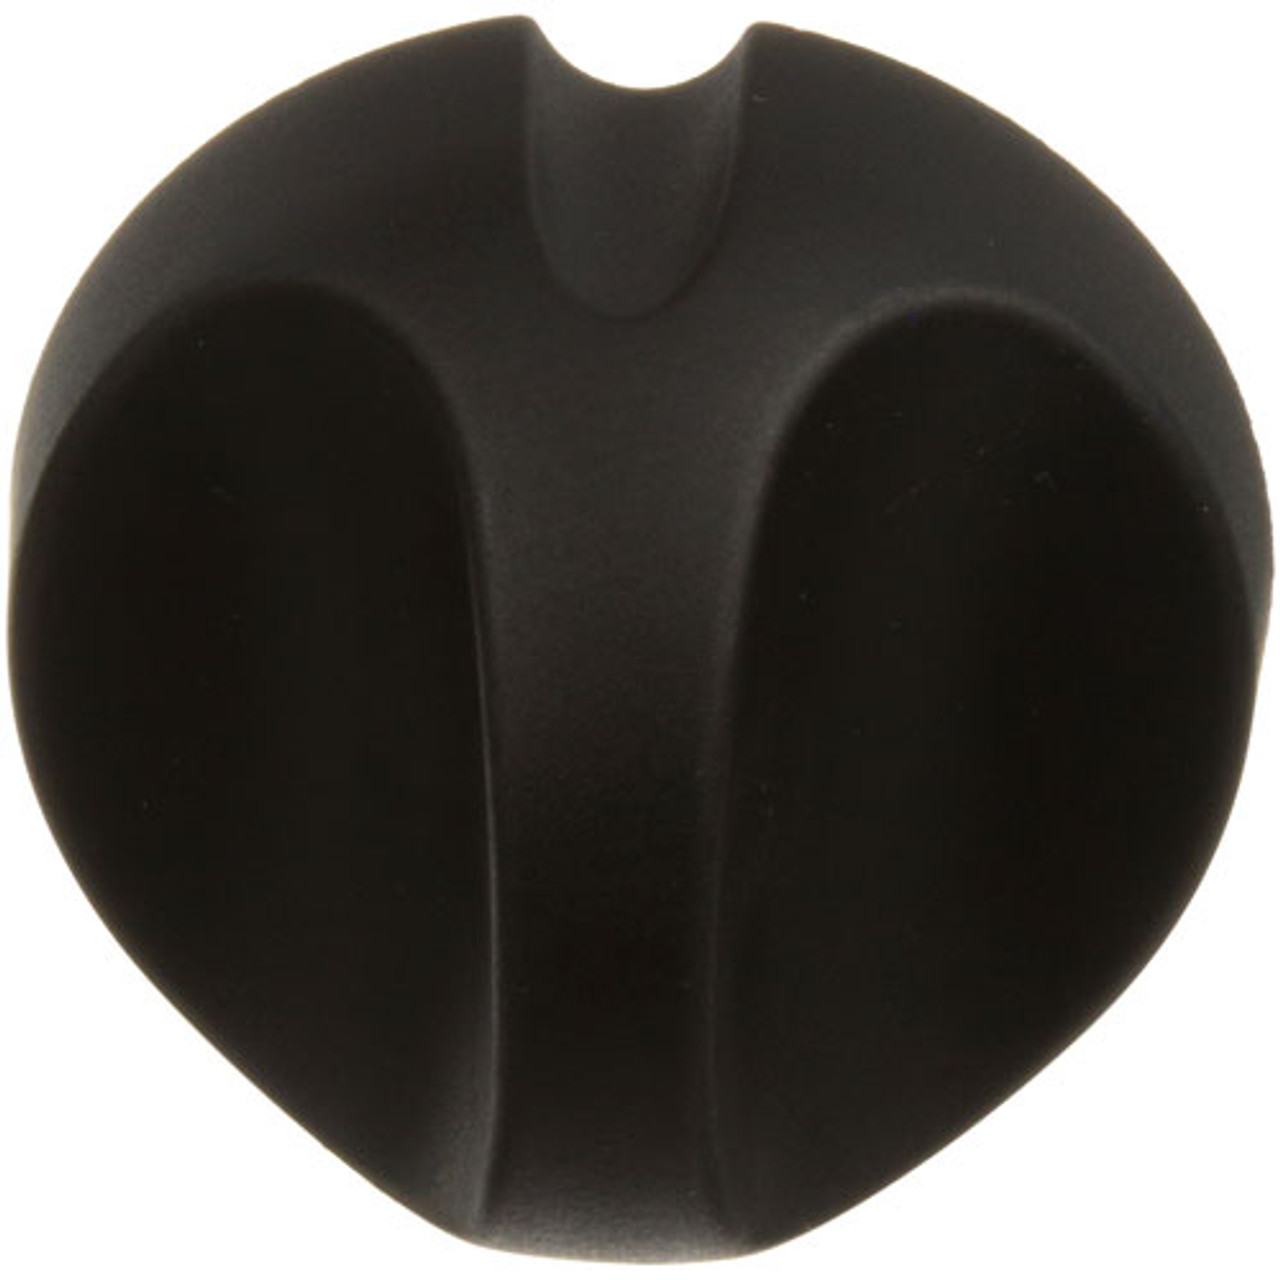 Knob - Replacement Part For Hobart 00-428300-00001